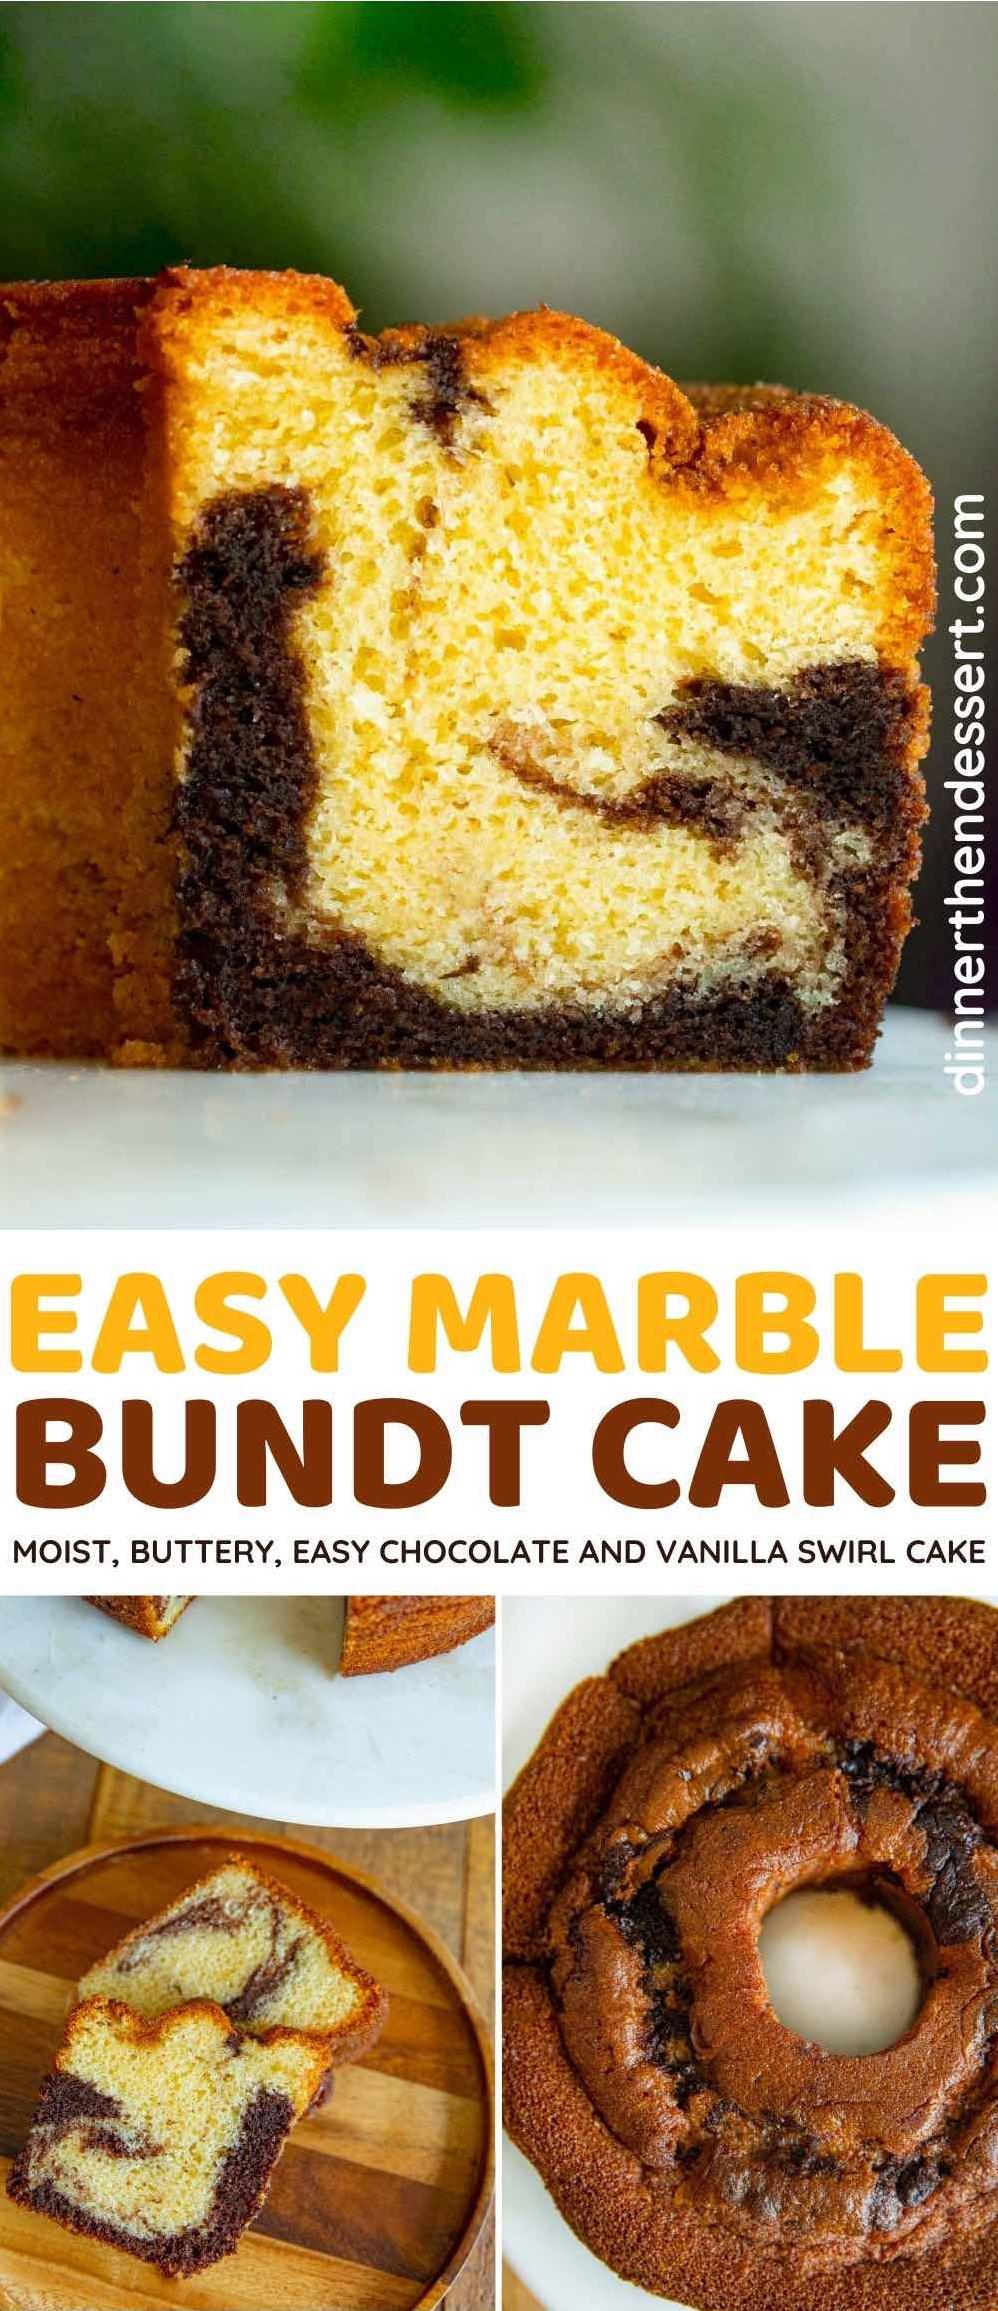  Don't be afraid to experiment with the marbling technique to make the cake uniquely yours.